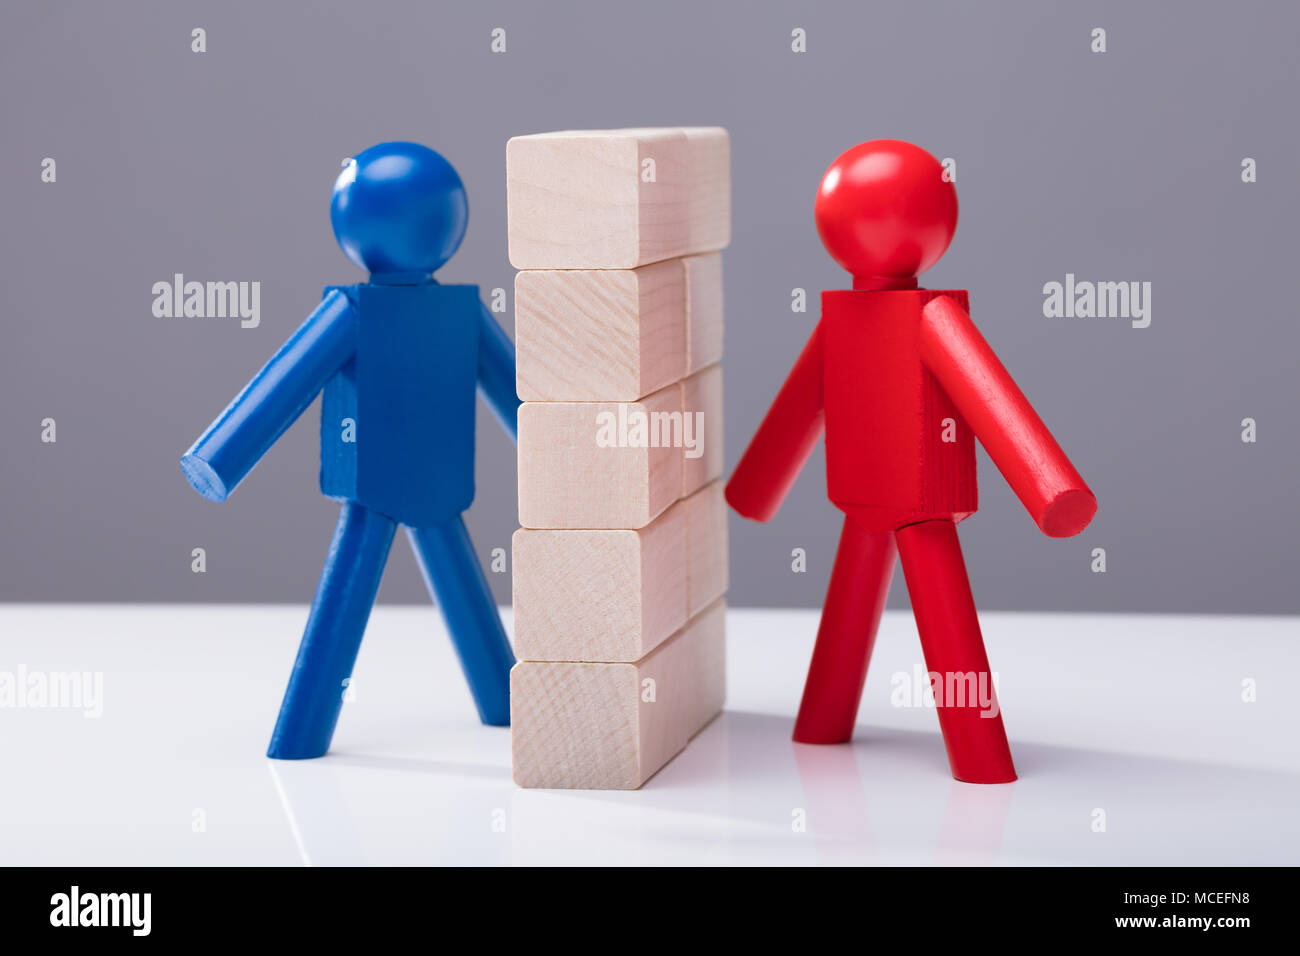 Red And Blue Human Figures Separated By Wooden Blocks Against Grey Background Stock Photo